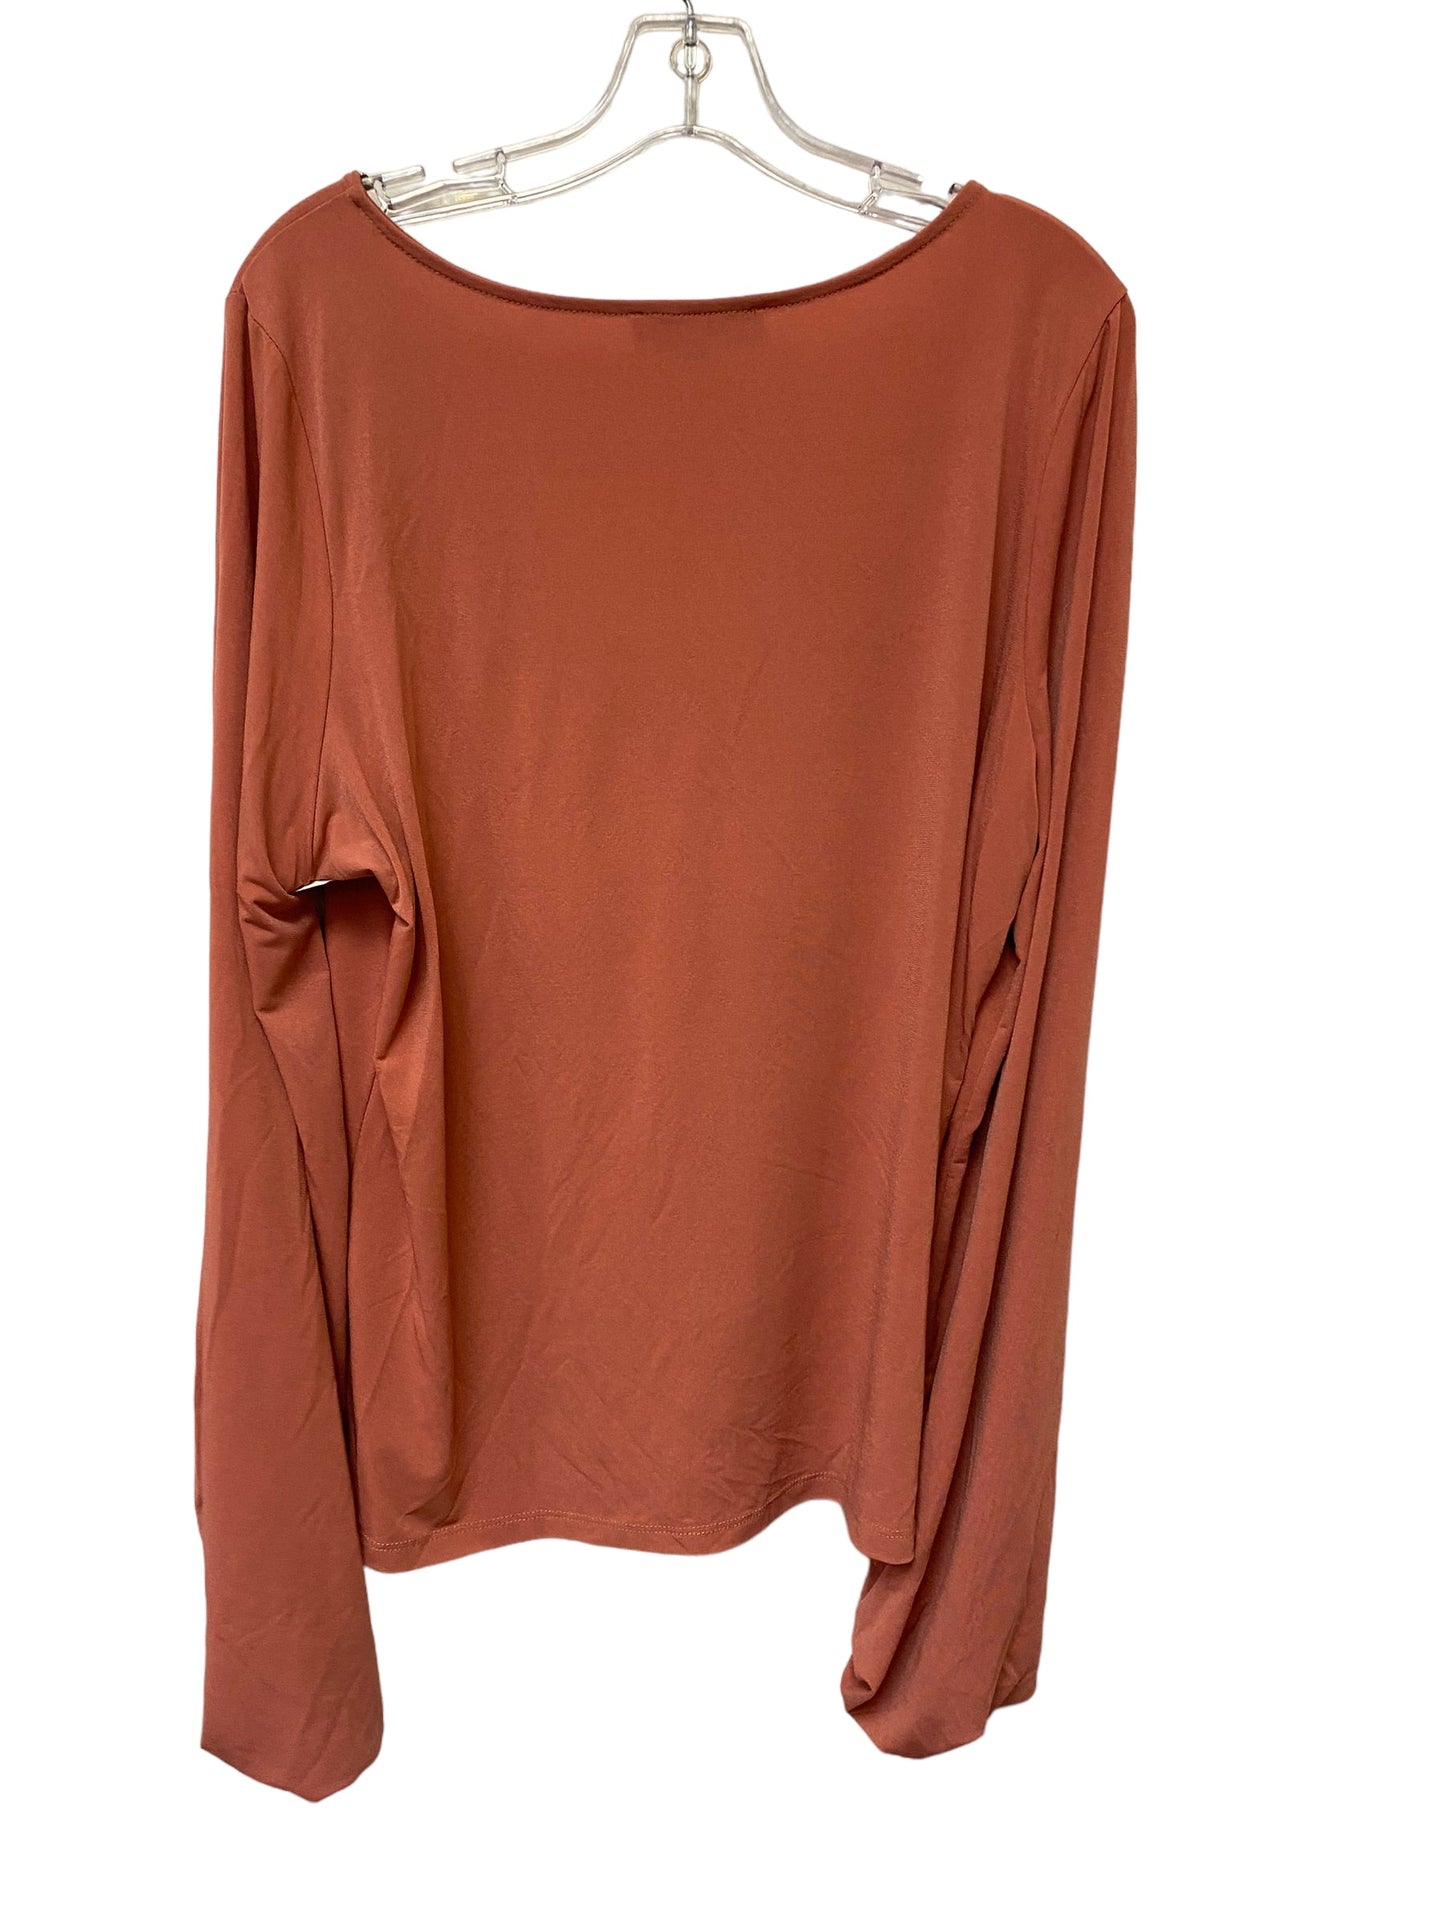 Top Long Sleeve By Eloquii  Size: 2x